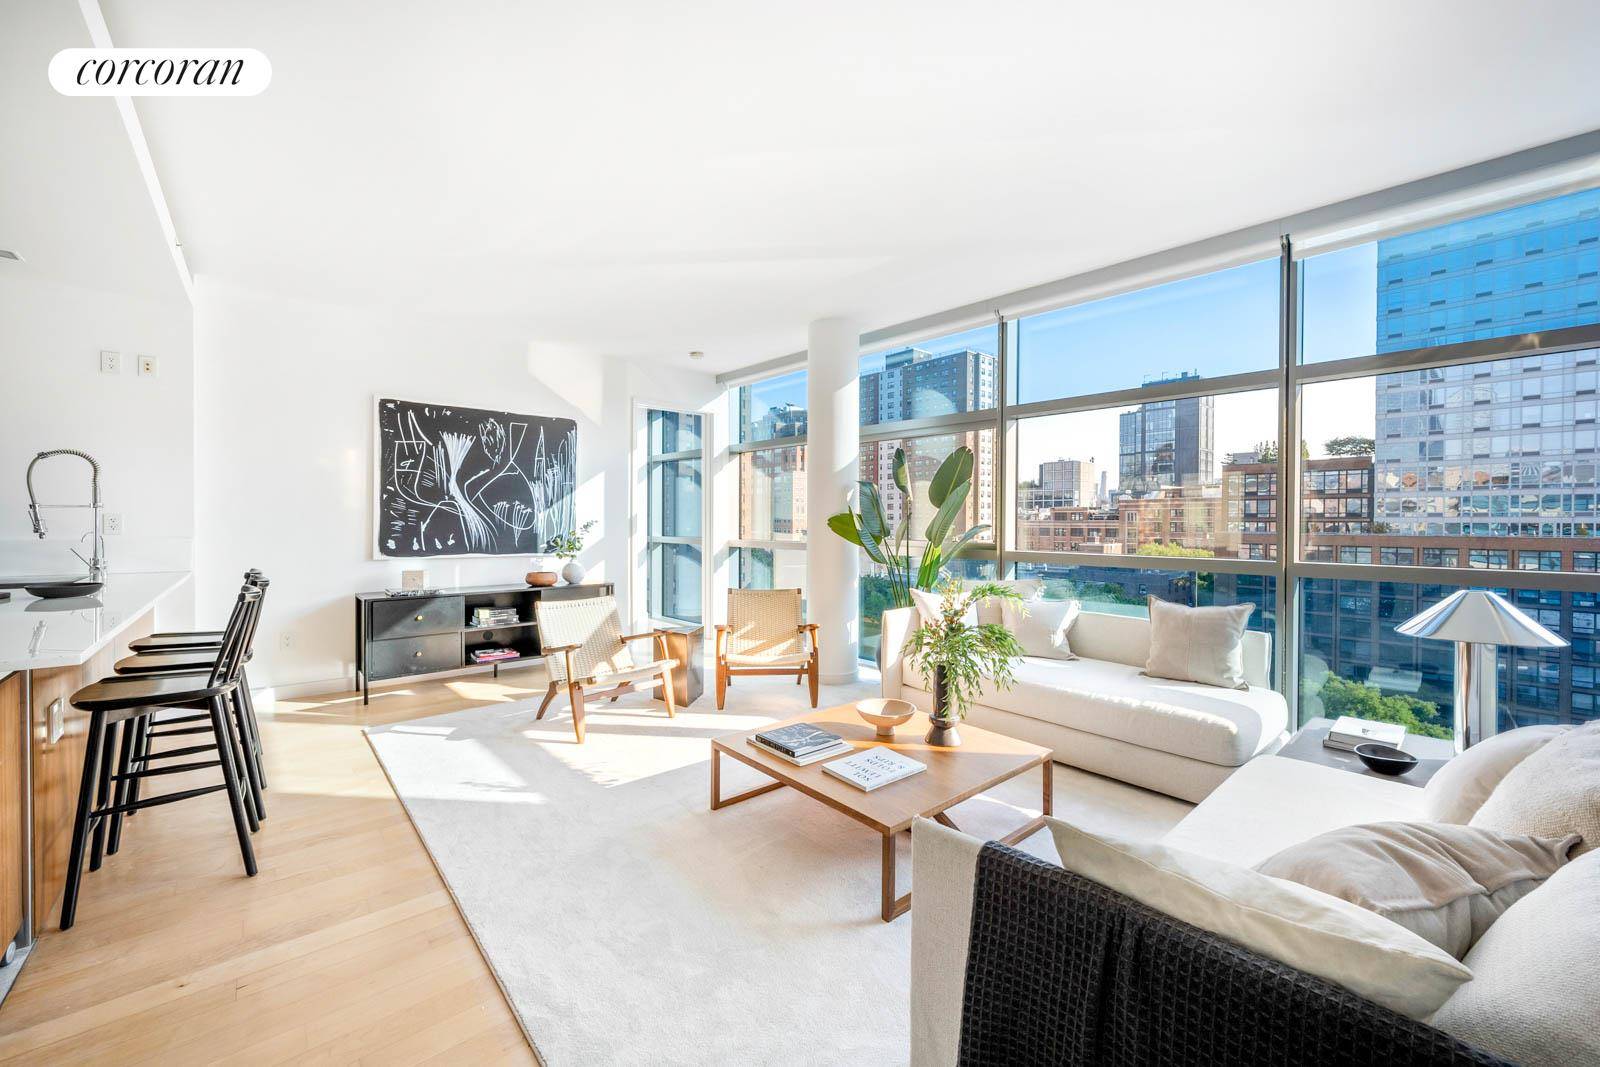 On the most prime West Chelsea block, this 3 bedroom 3 bathroom penthouse condominium is flanked by southern and northern views that capture the West Chelsea skyline, Midtown and beyond.